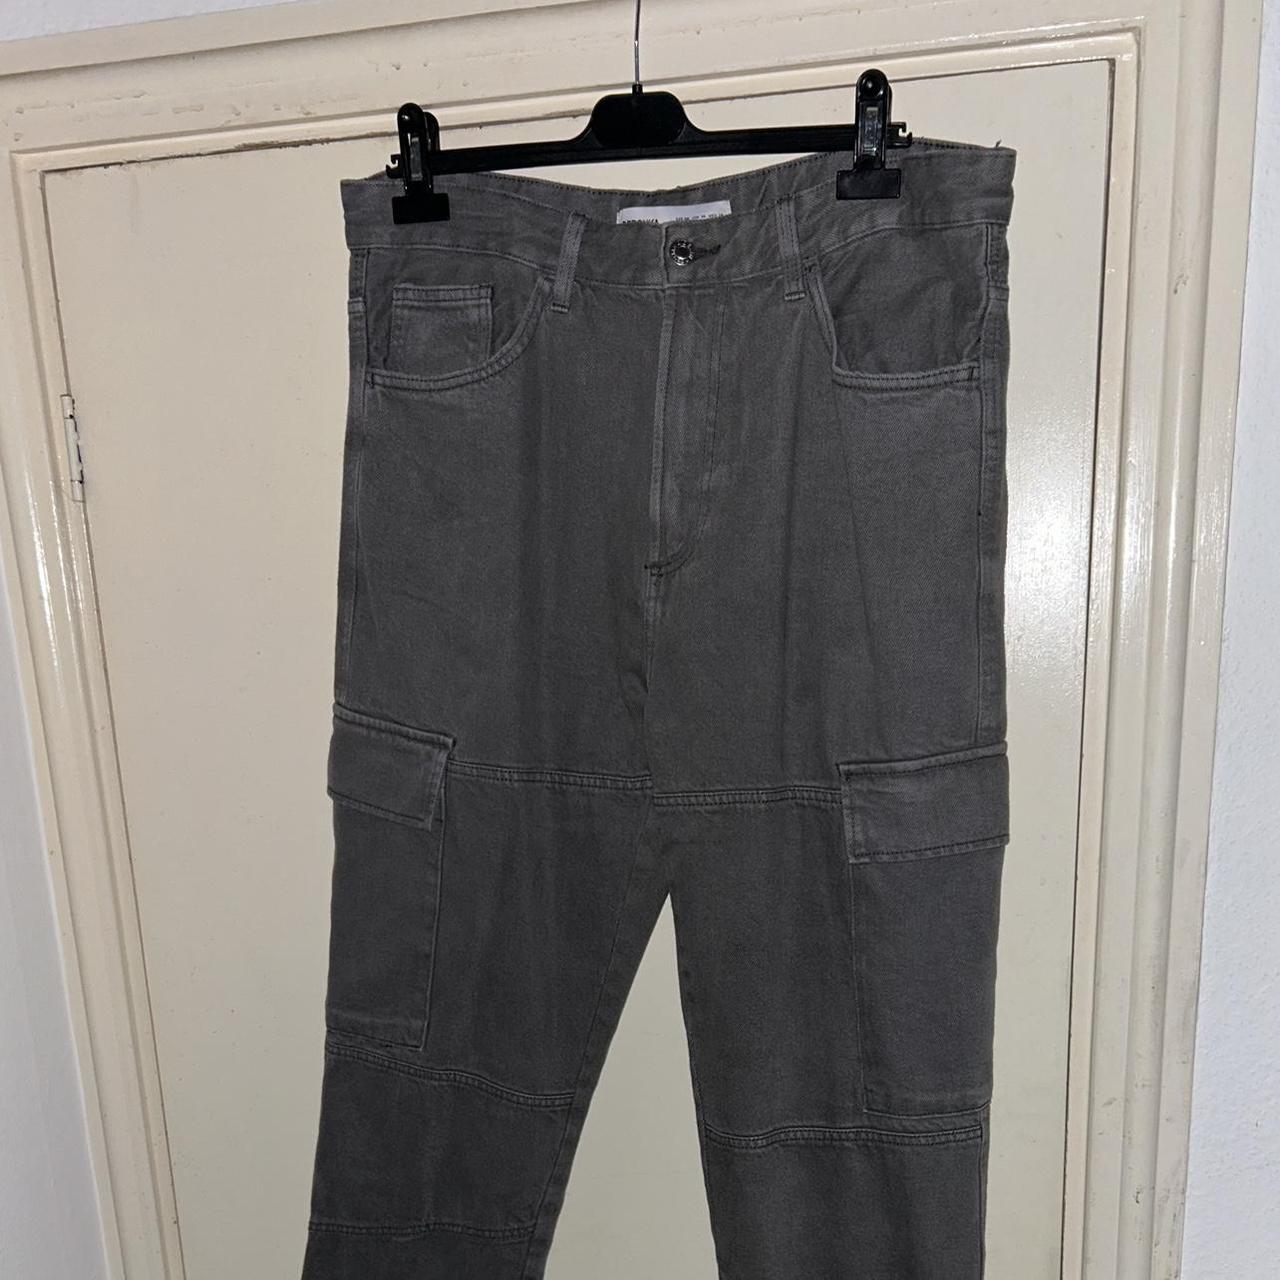 Bershka Faux Leather Pants. Size M but bands on both - Depop